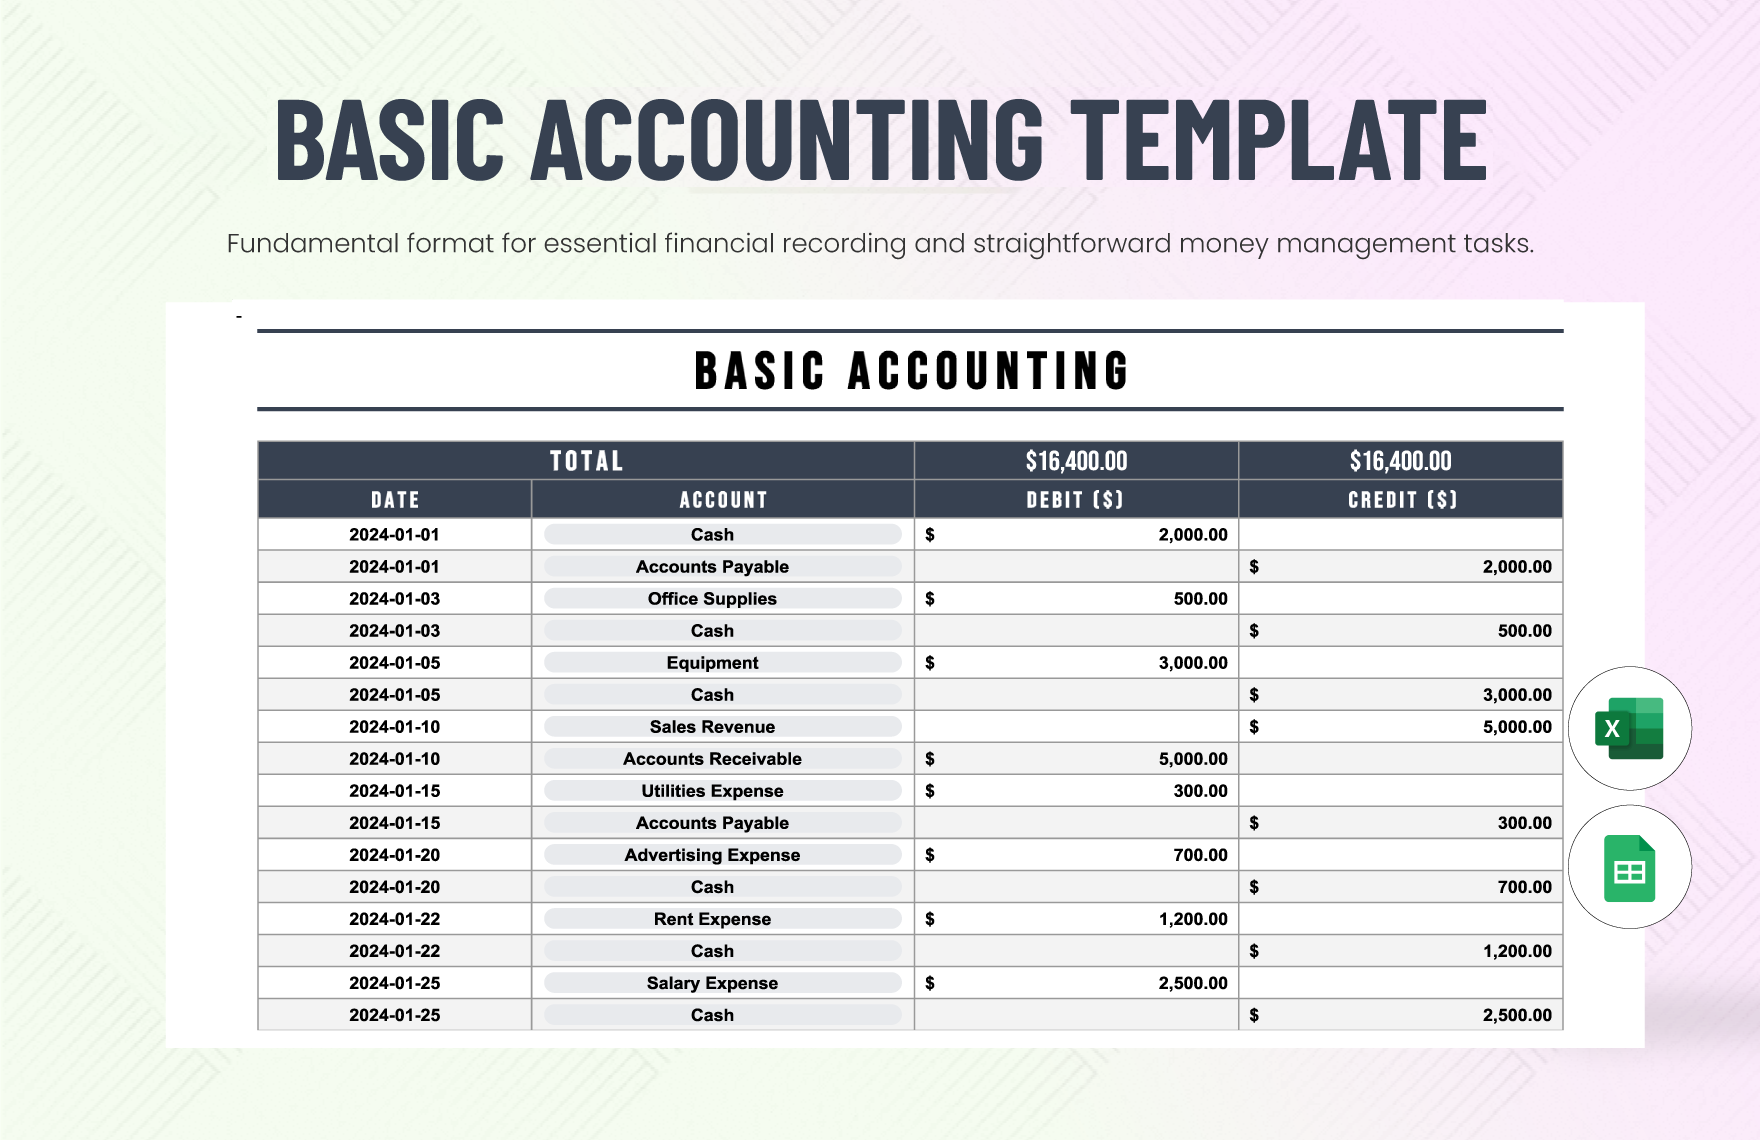 Free Basic Accounting Template in Excel, Google Sheets